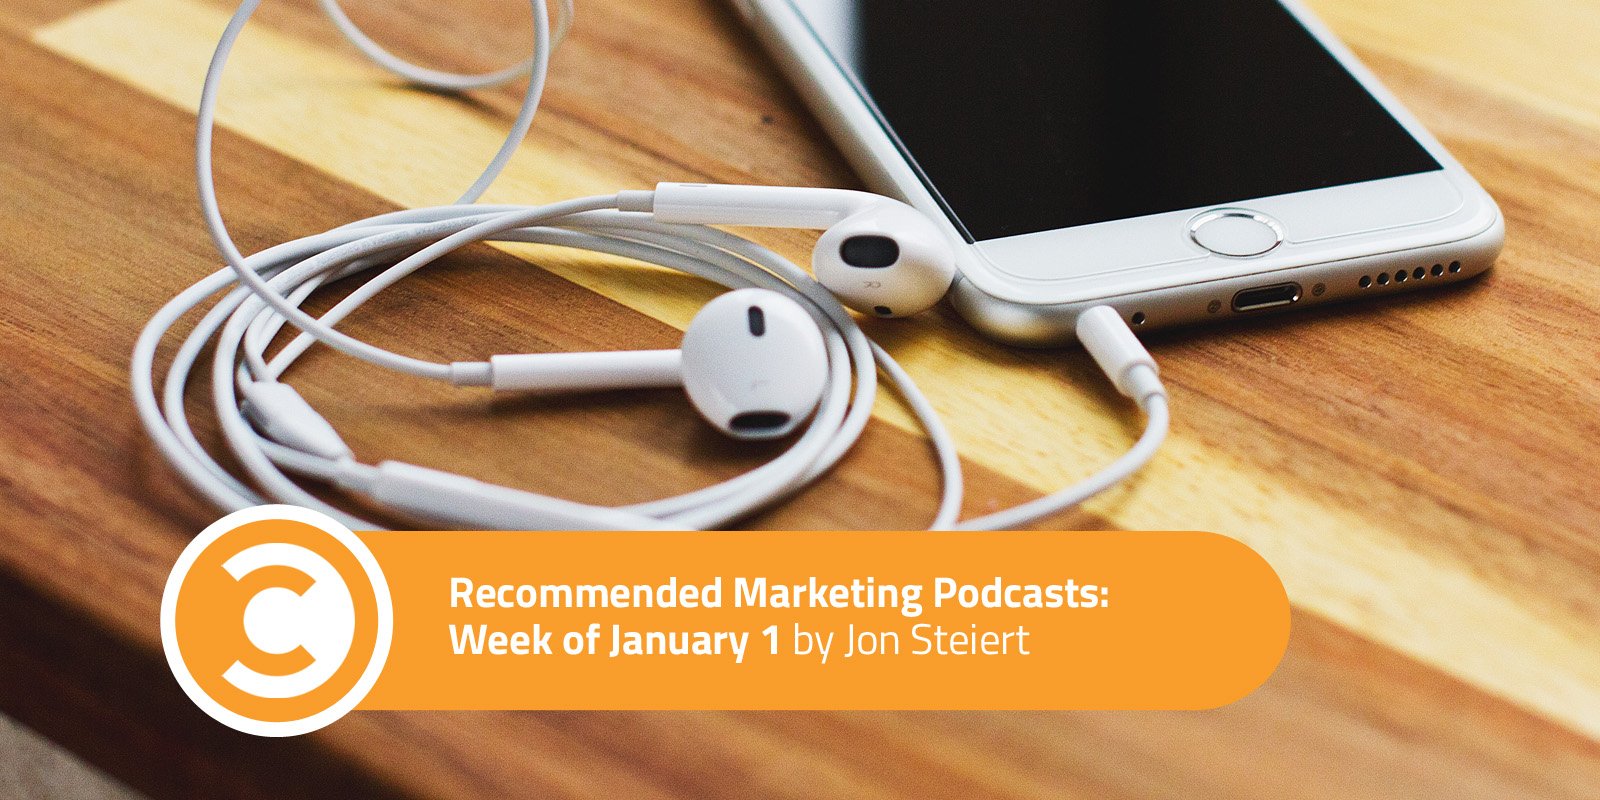 Recommended Marketing Podcasts Week of January 1